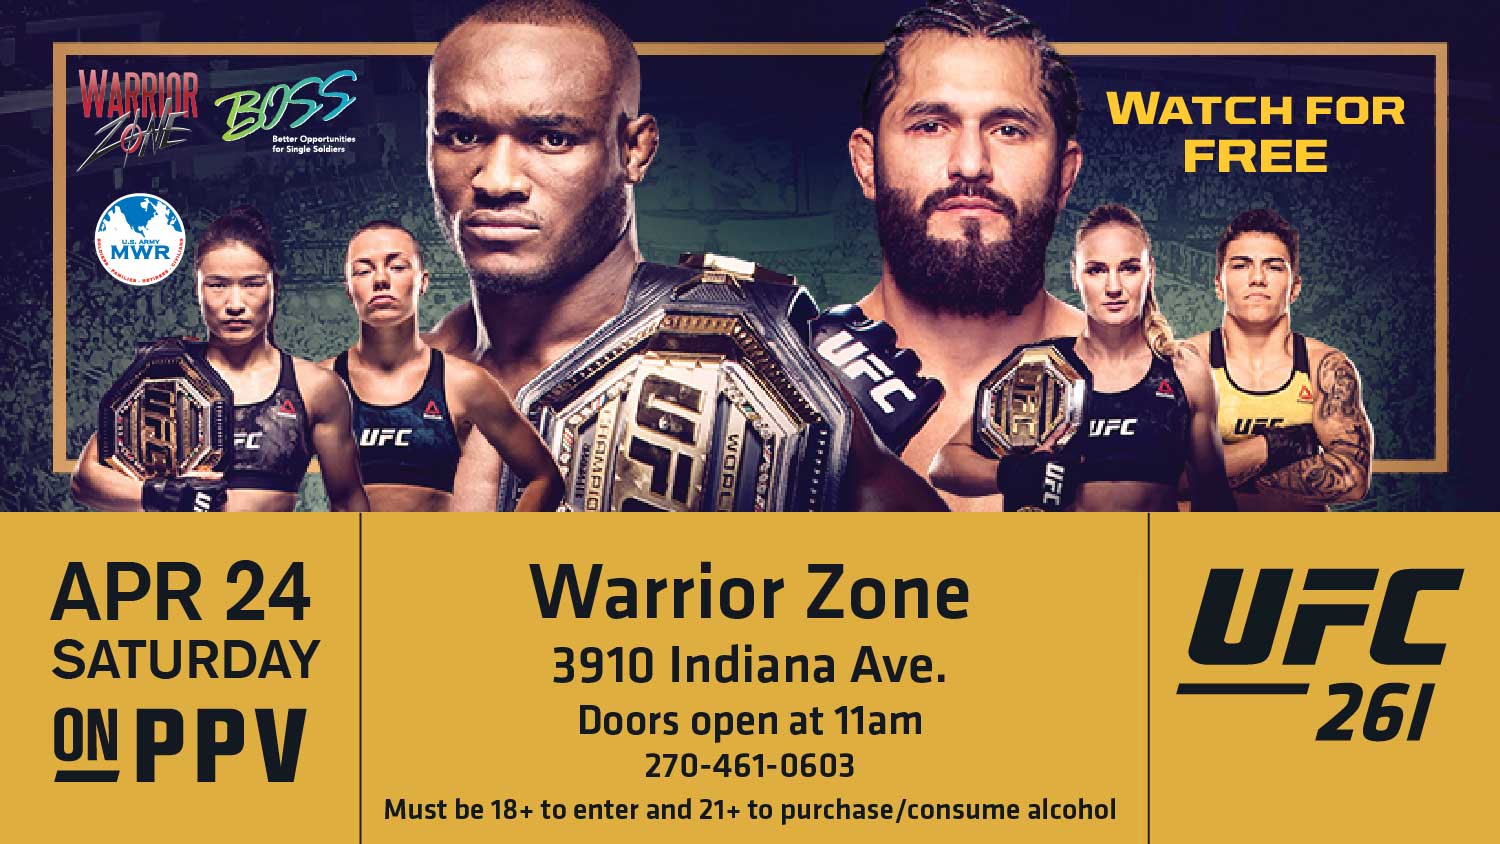 Calendar of Watch UFC #261 with BOSS at Warrior Zone Ft